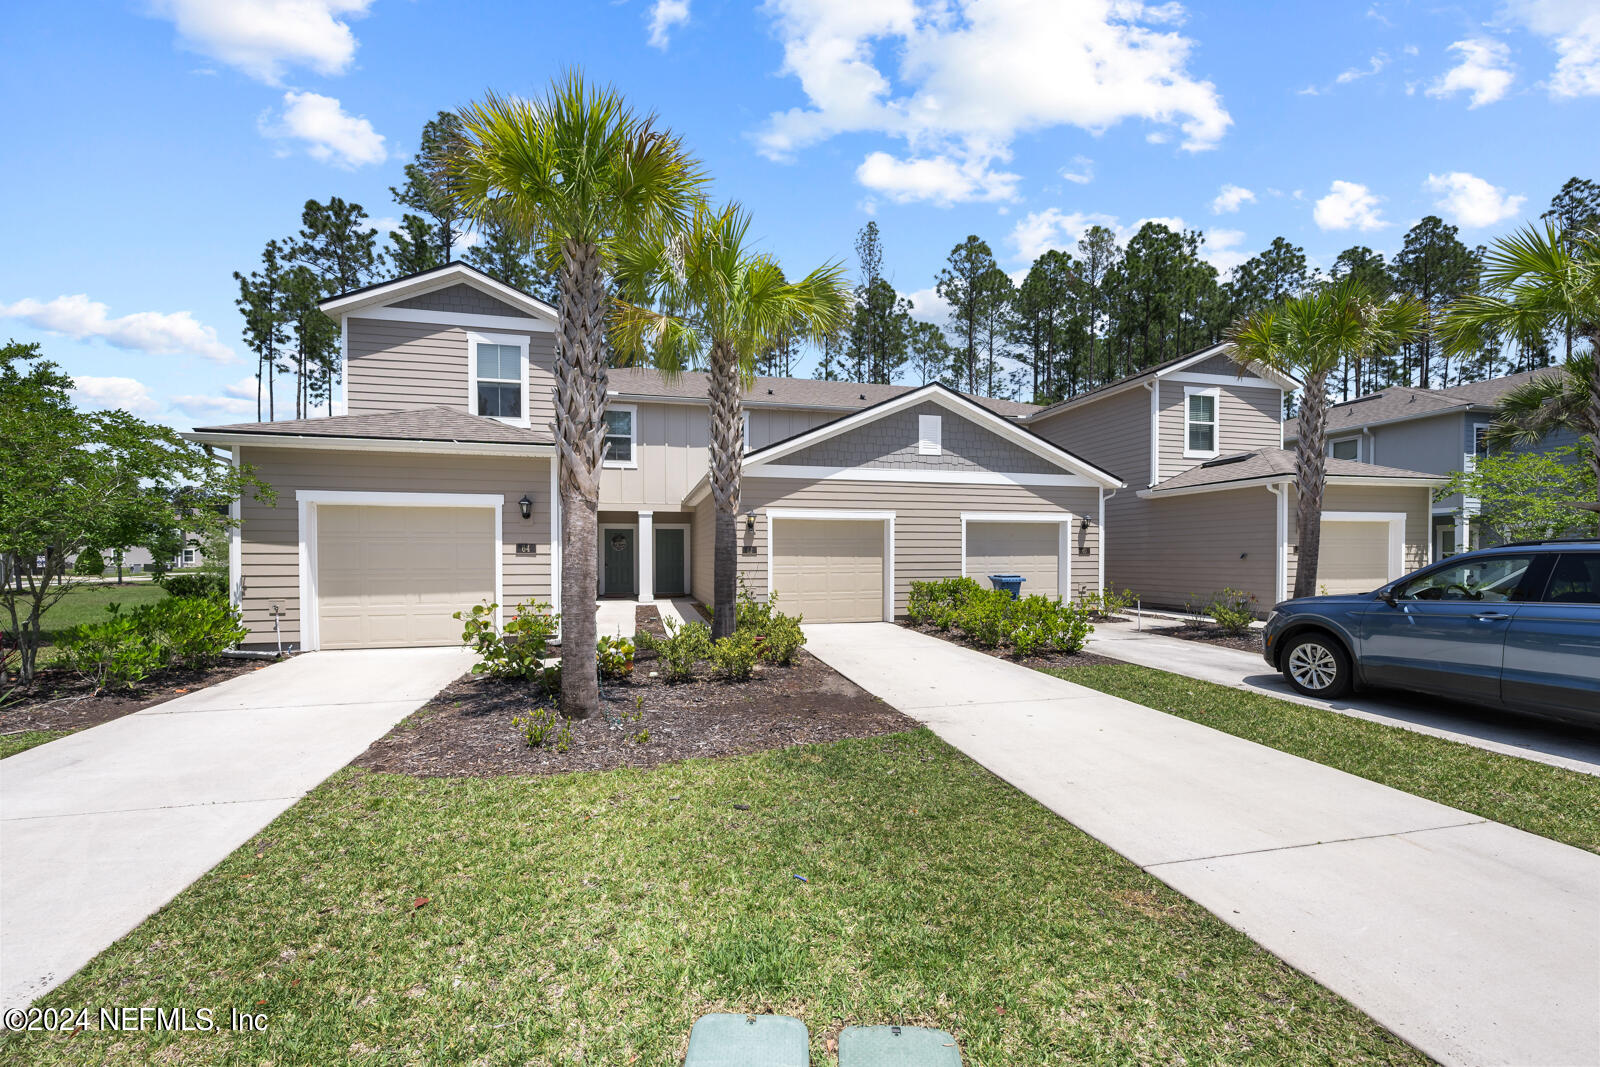 St Johns, FL home for sale located at 62 Scotch Pebble Drive, St Johns, FL 32259